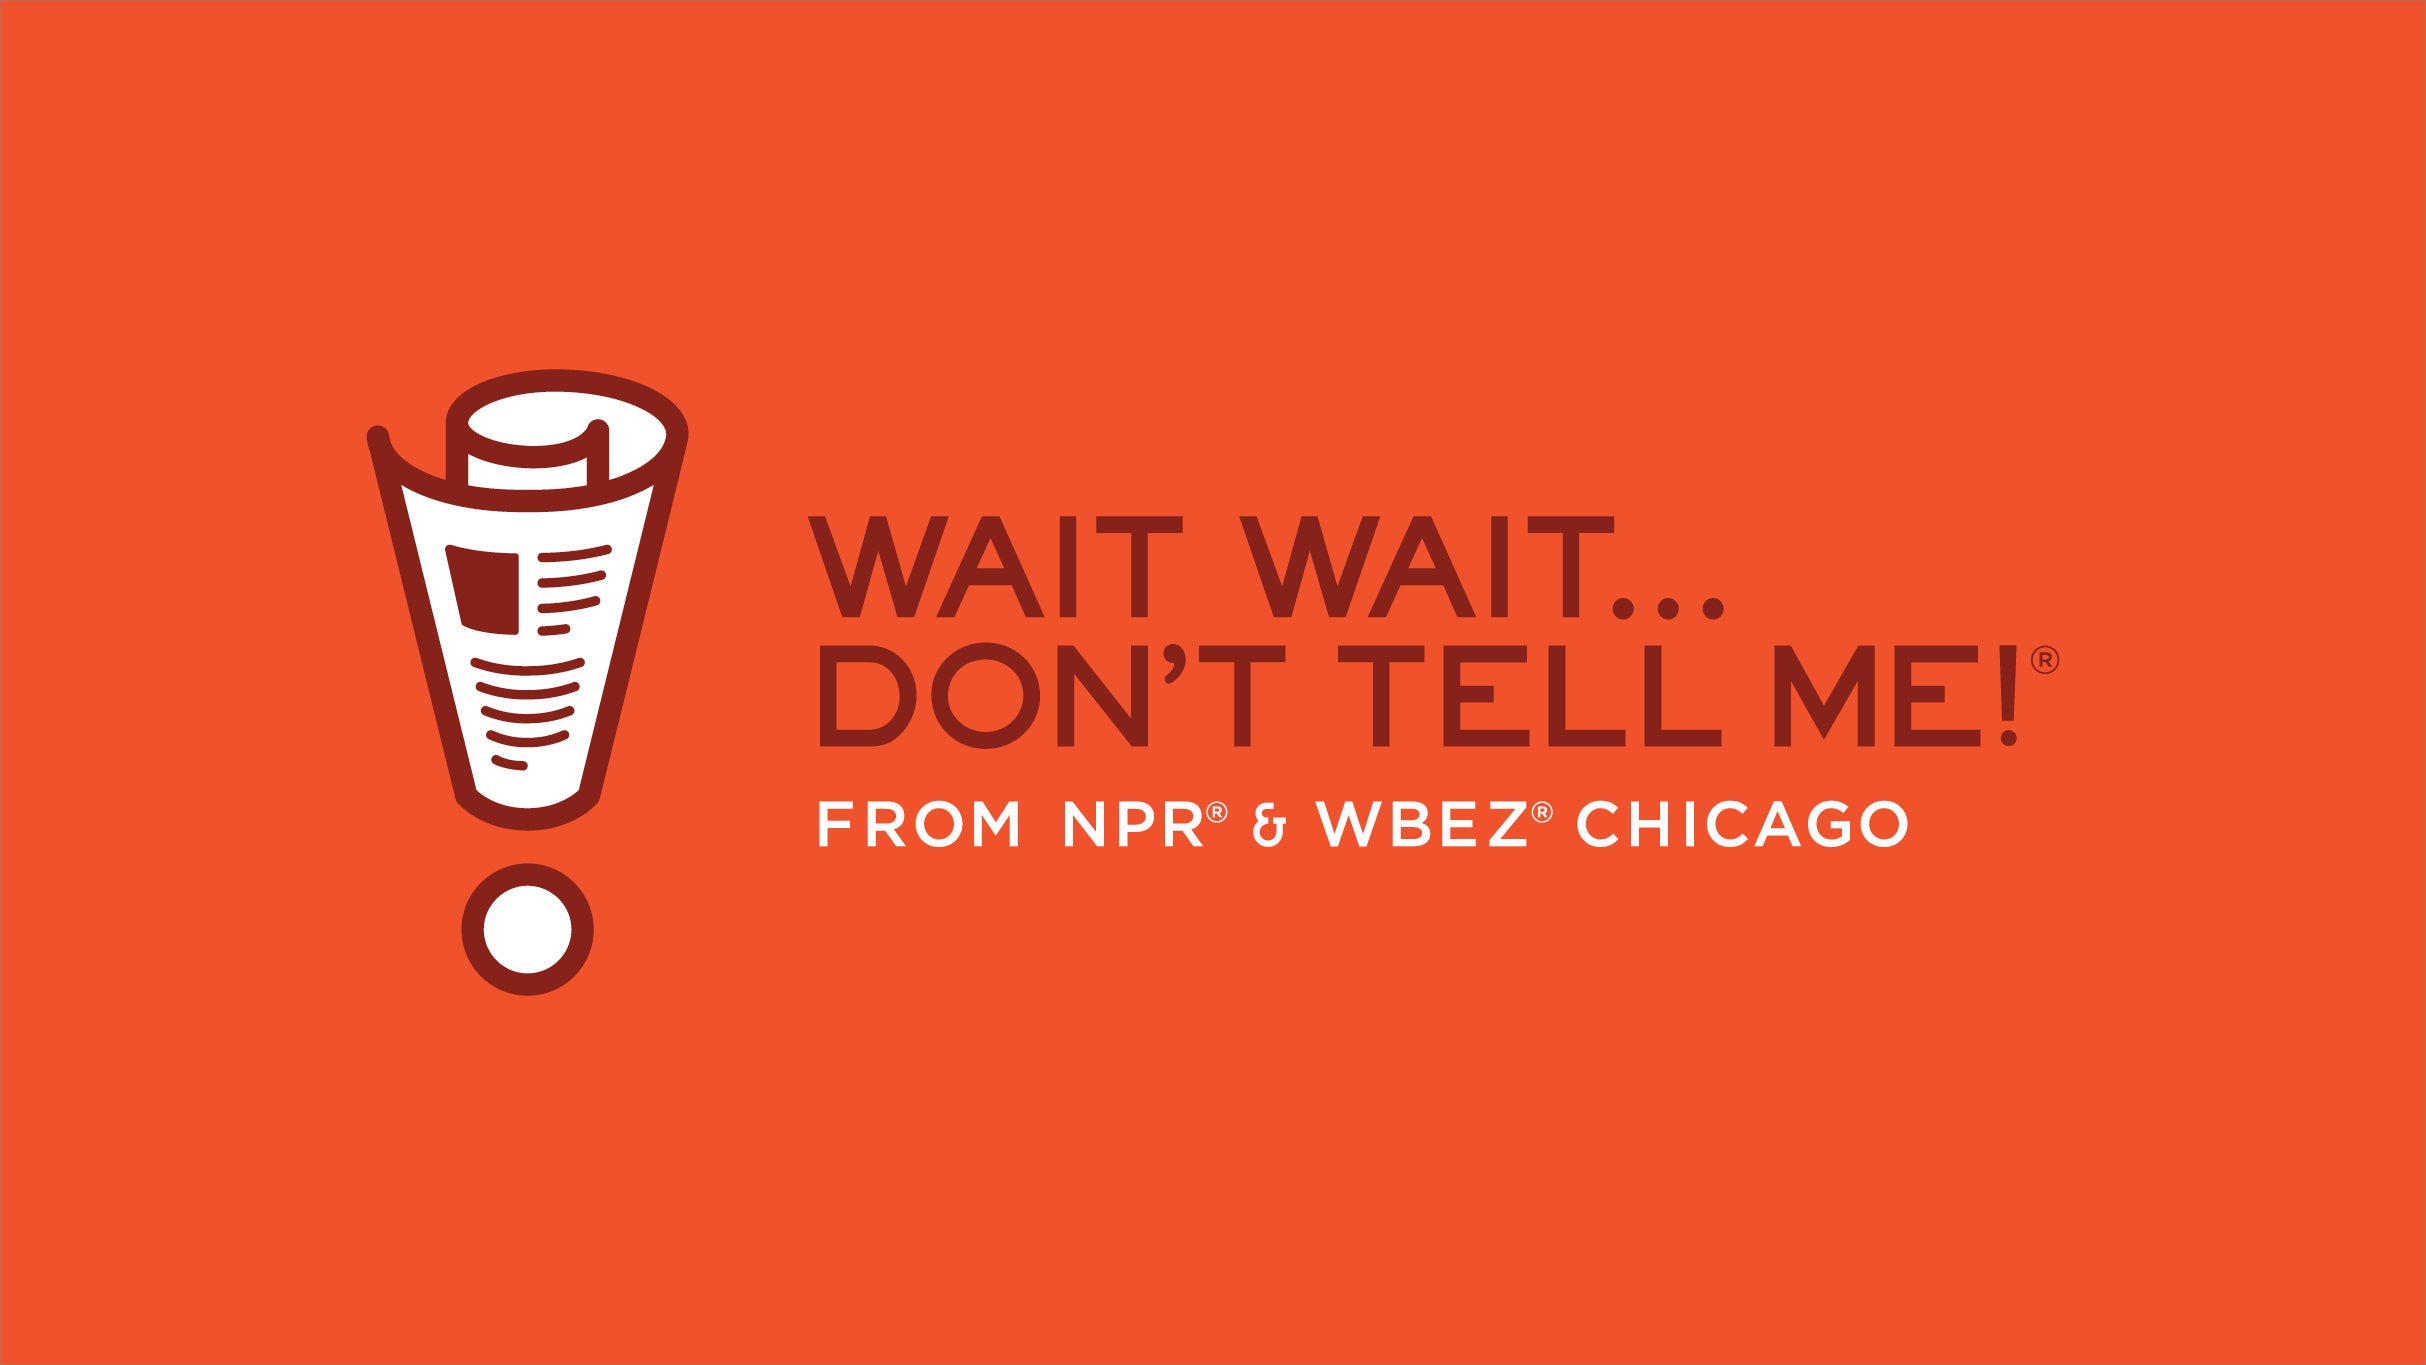 NPR's Wait Wait Don't Tell Me presale code for approved tickets in Seattle